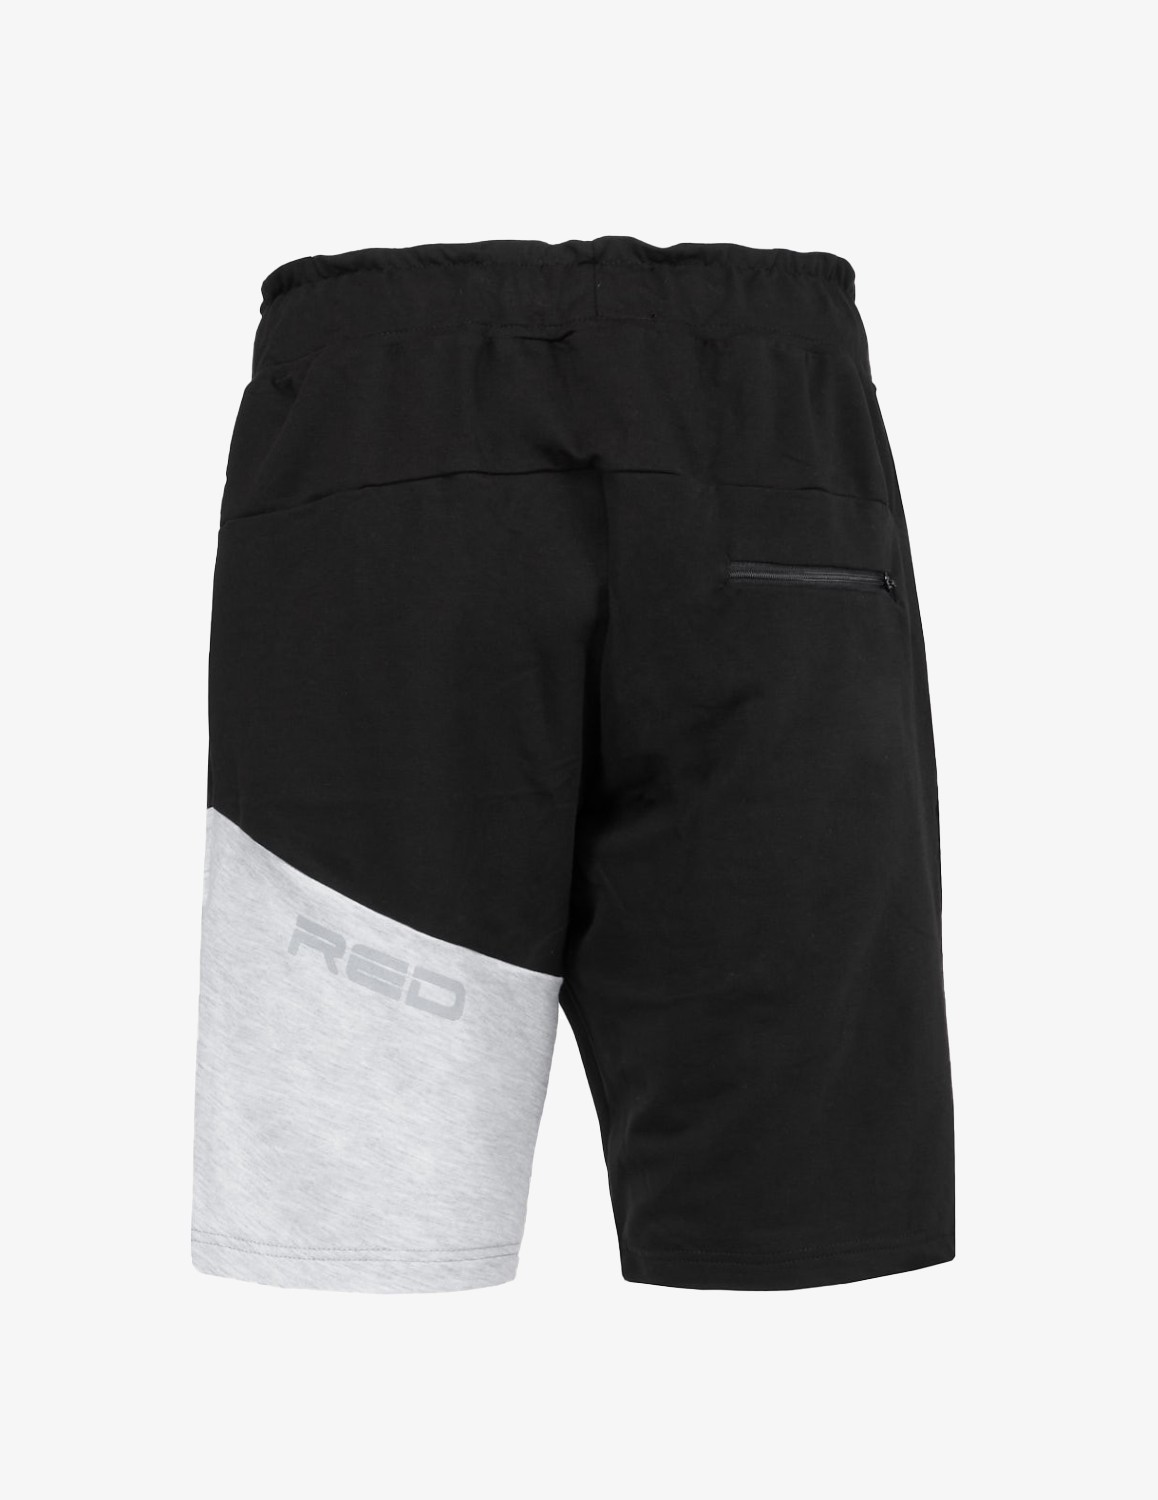 DUO RED Shorts Grey/Black